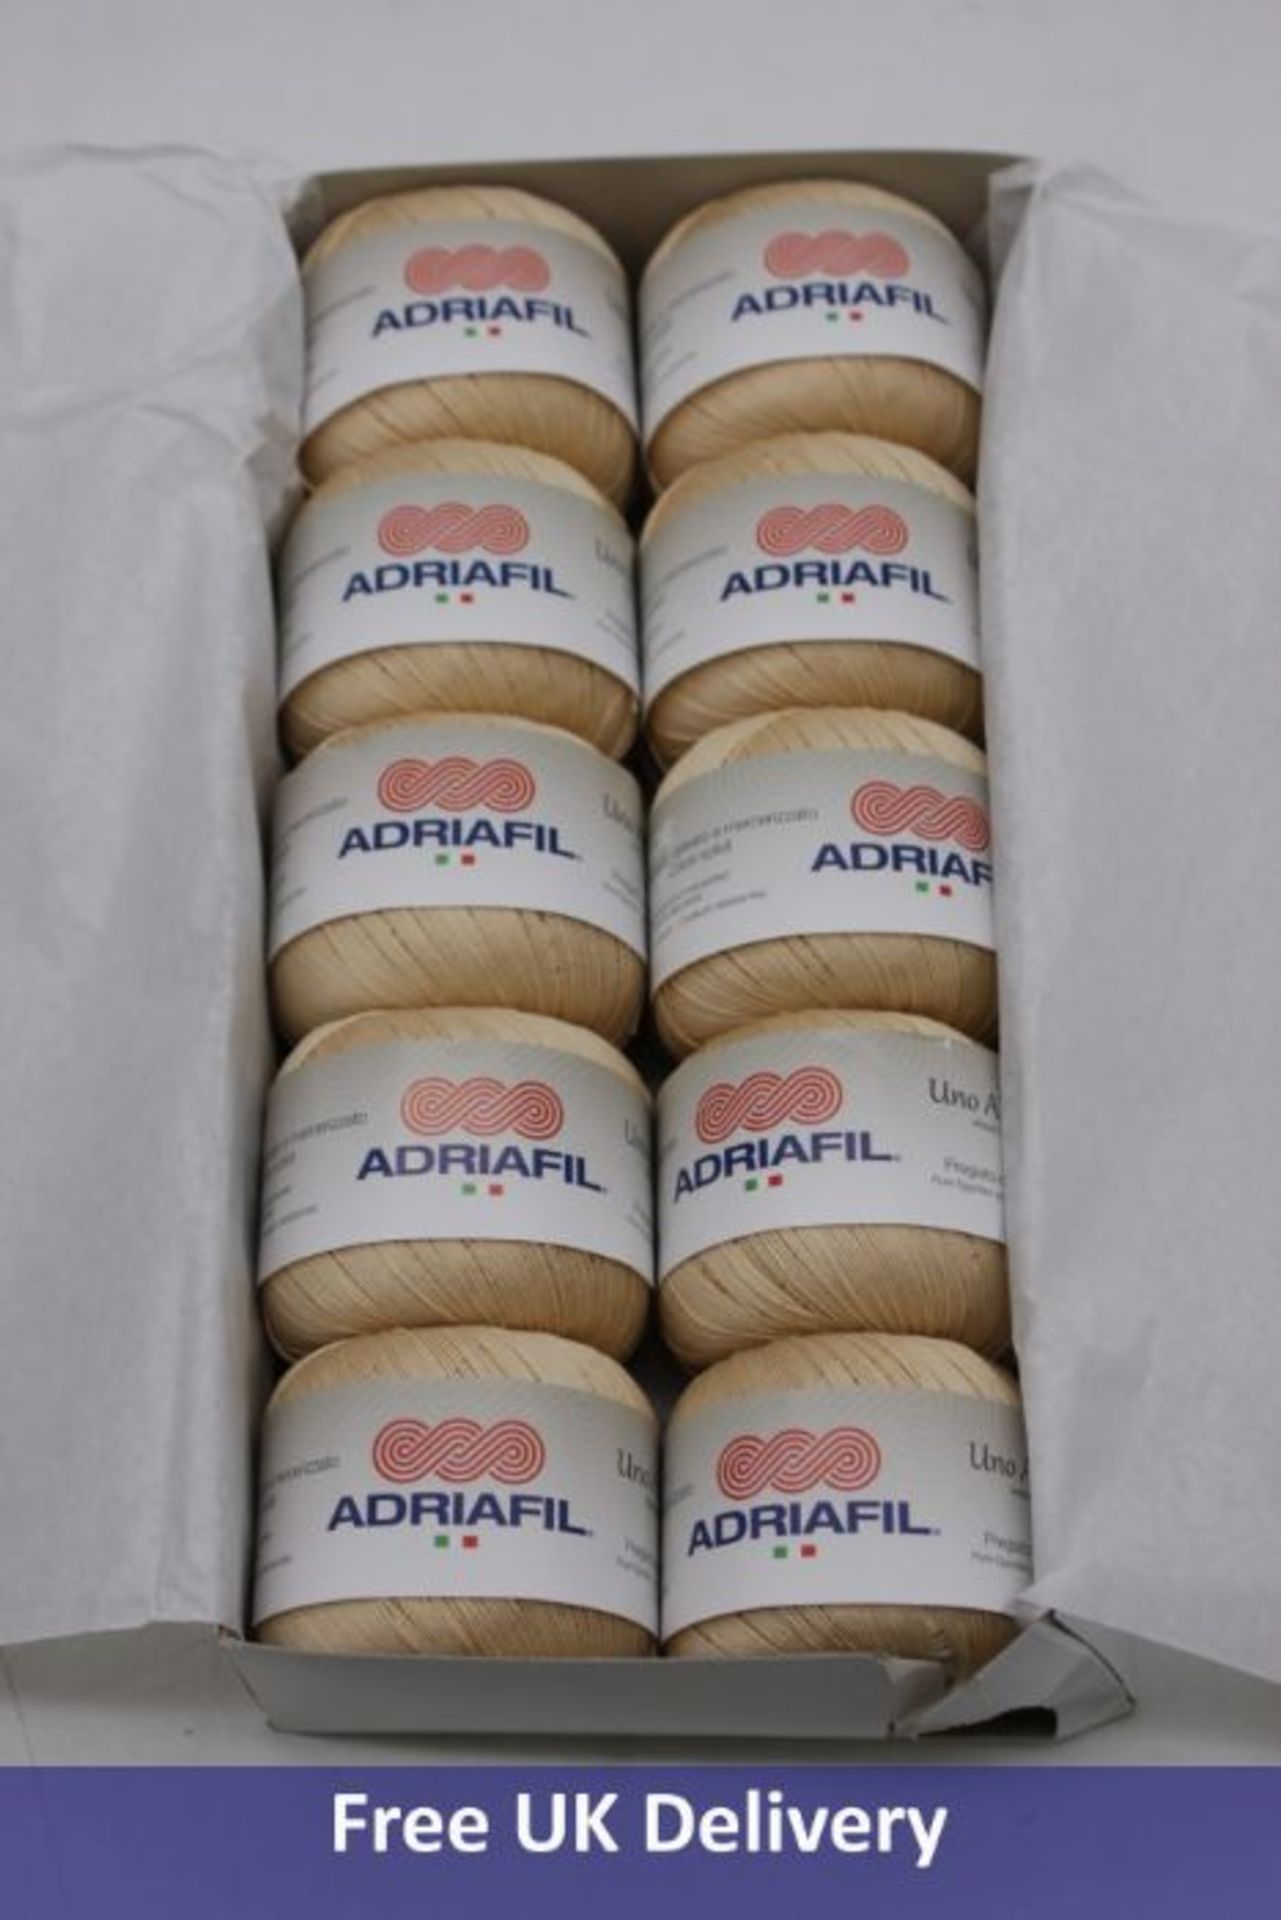 Four Packs of Adriafil Uno A Ritorto 8 100% Cottone (10 Piece in Pack), 1x Colour 25 06, Size 1.5-1. - Image 3 of 4